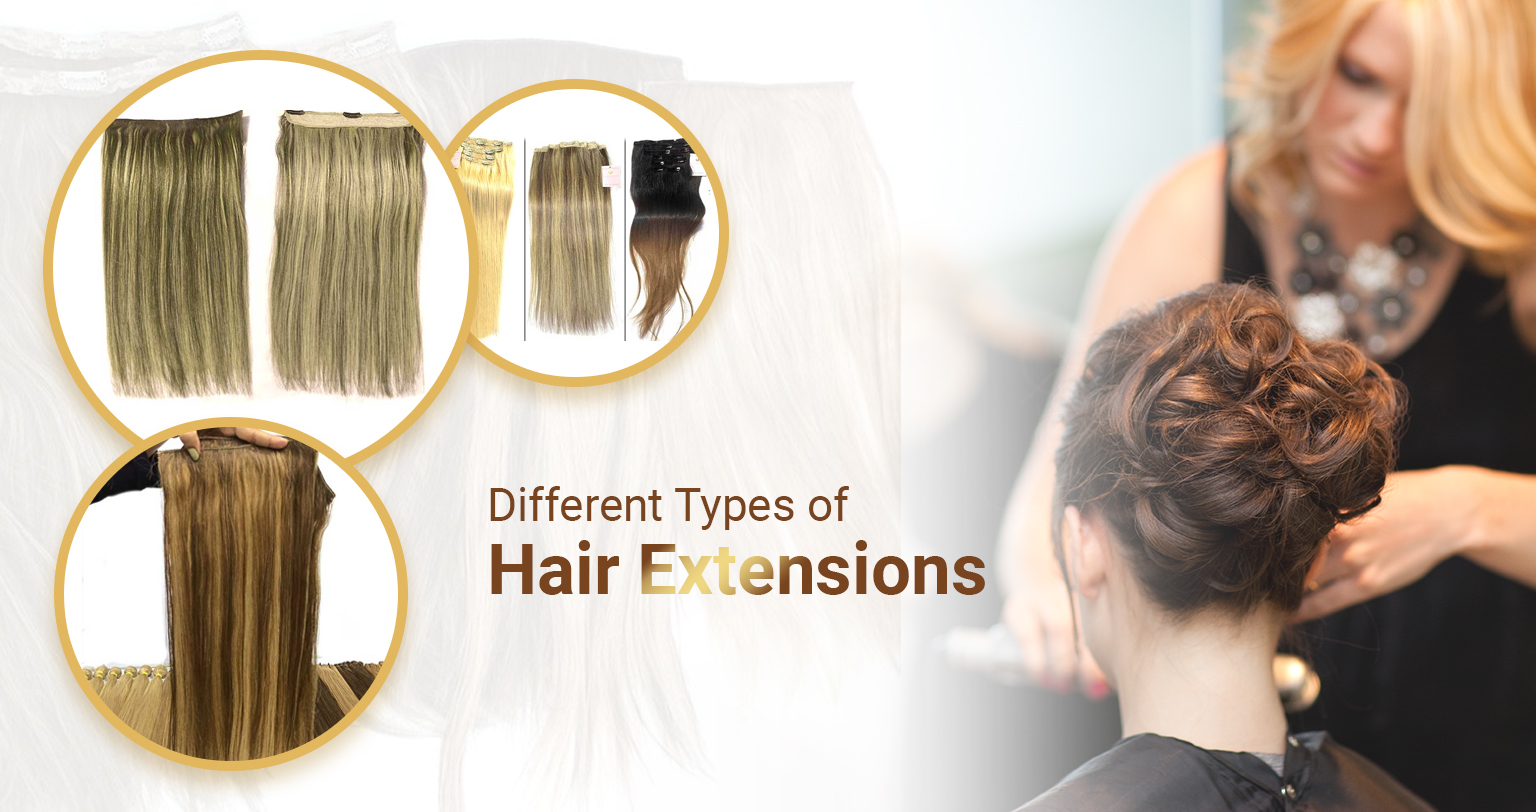 Hair Extensions Guide | What Are the Different Types of Hair Extensions?